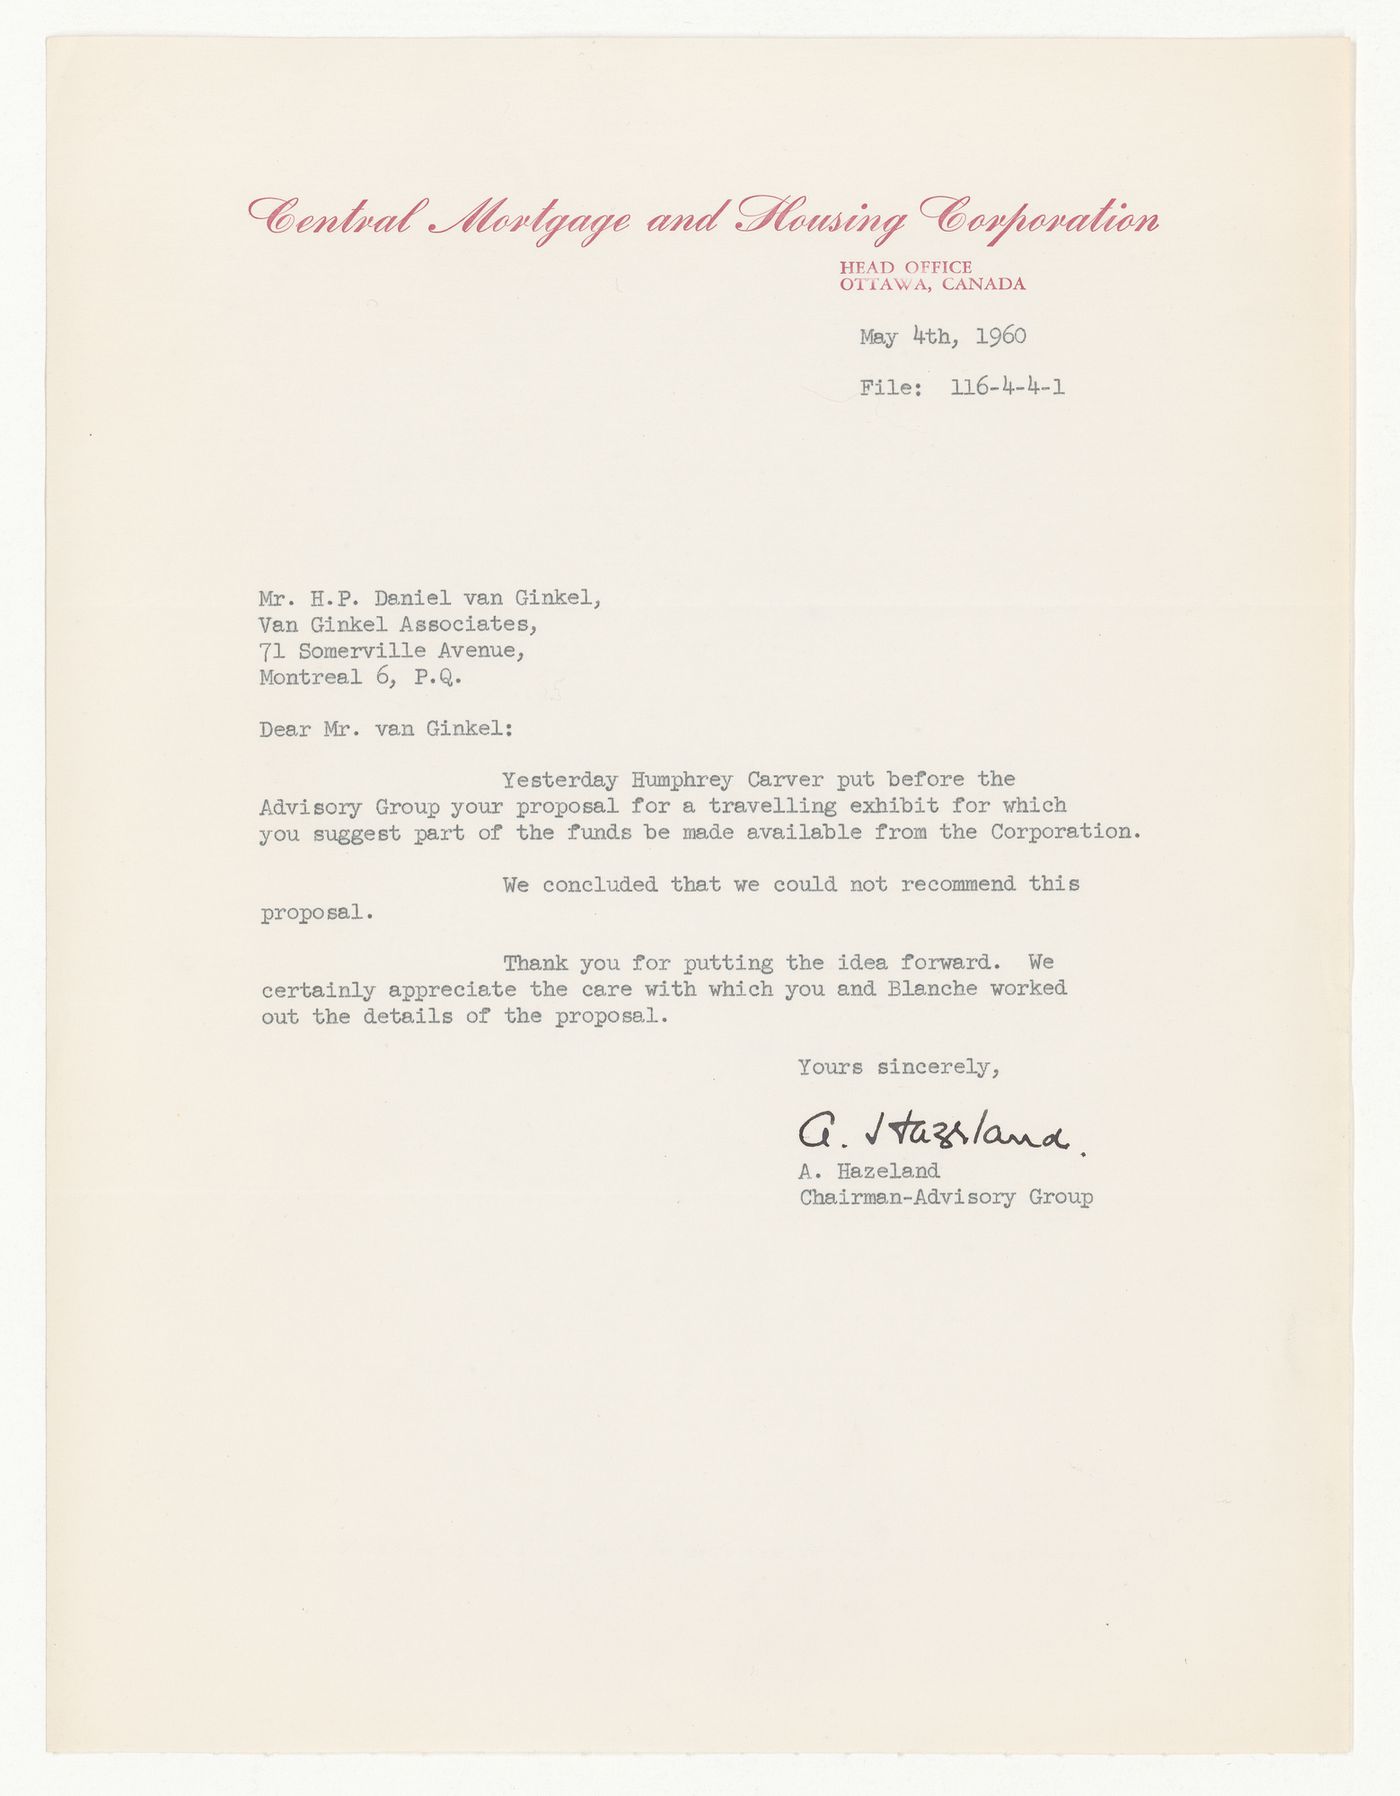 Letter from A. Hazeland to H. P. Daniel van Ginkel for CMHC Exhibition